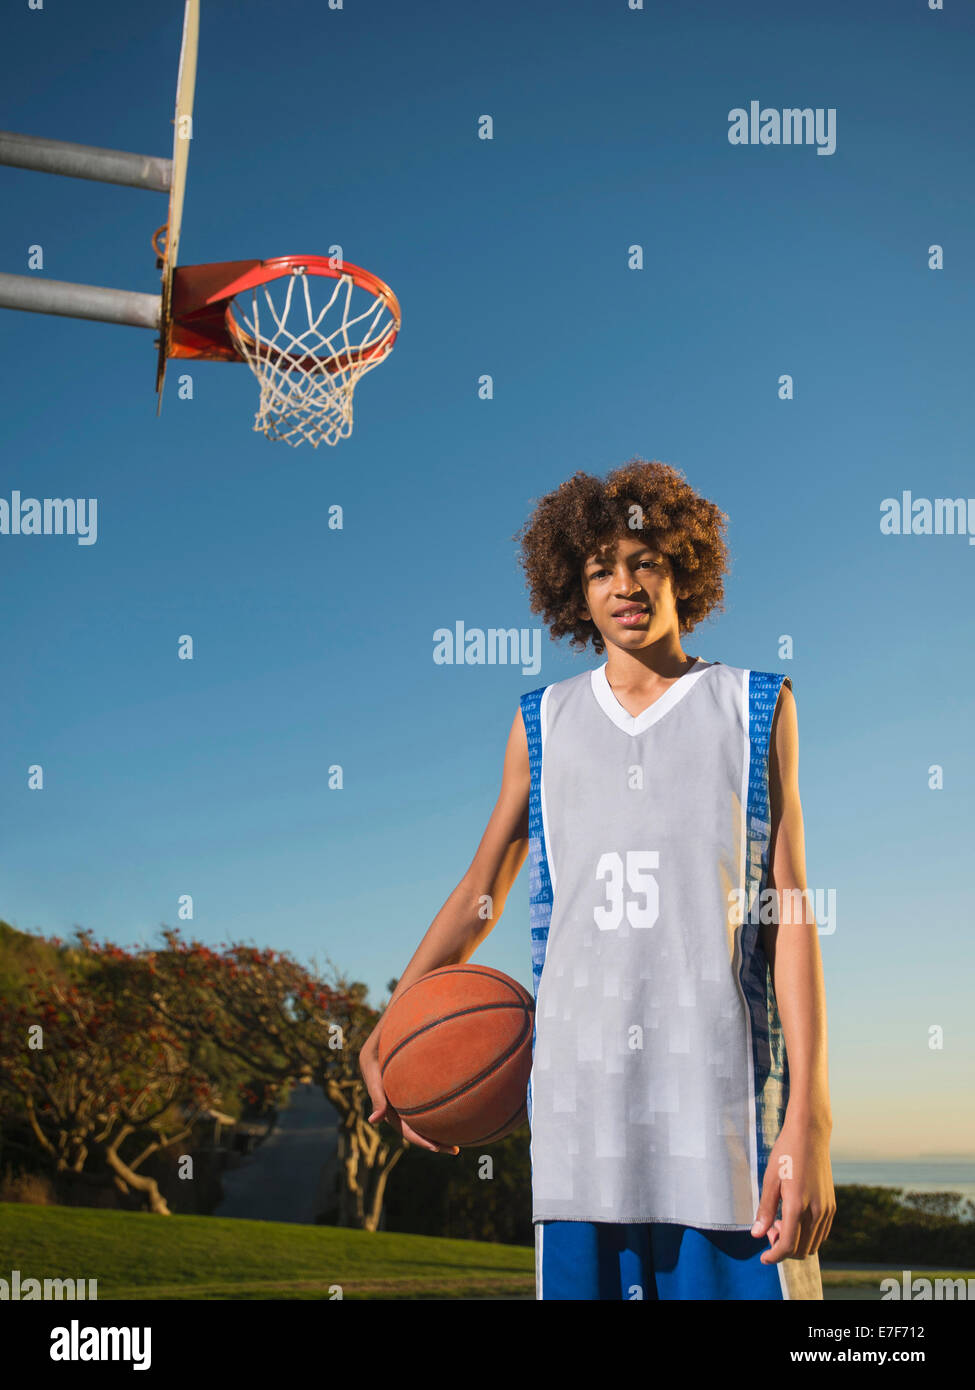 Black woman holding basketball on court Banque D'Images